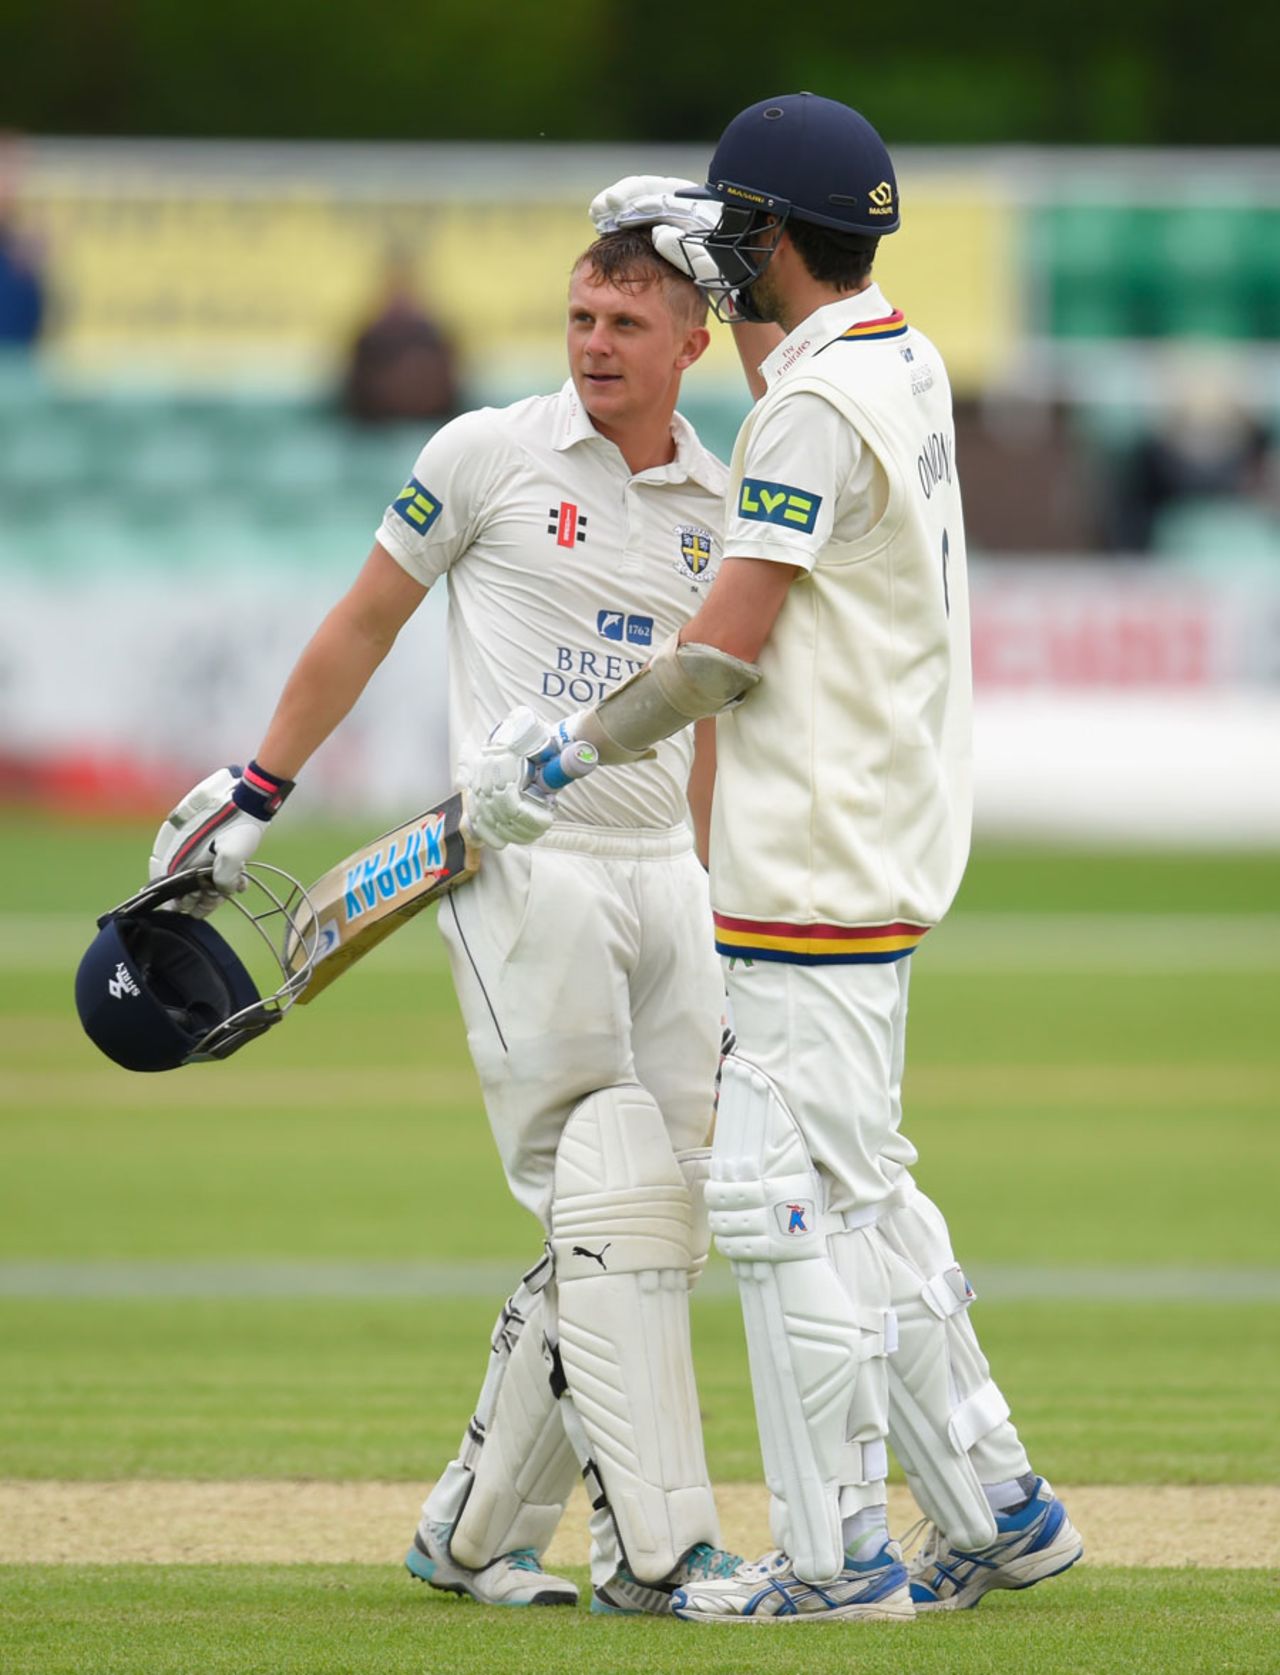 Scott Borthwick reached his hundred during a last-wicket stand of 95 with Graham Onions, Worcestershire v Durham, County Championship, Division One, New Road, 2nd day, May 25, 2015